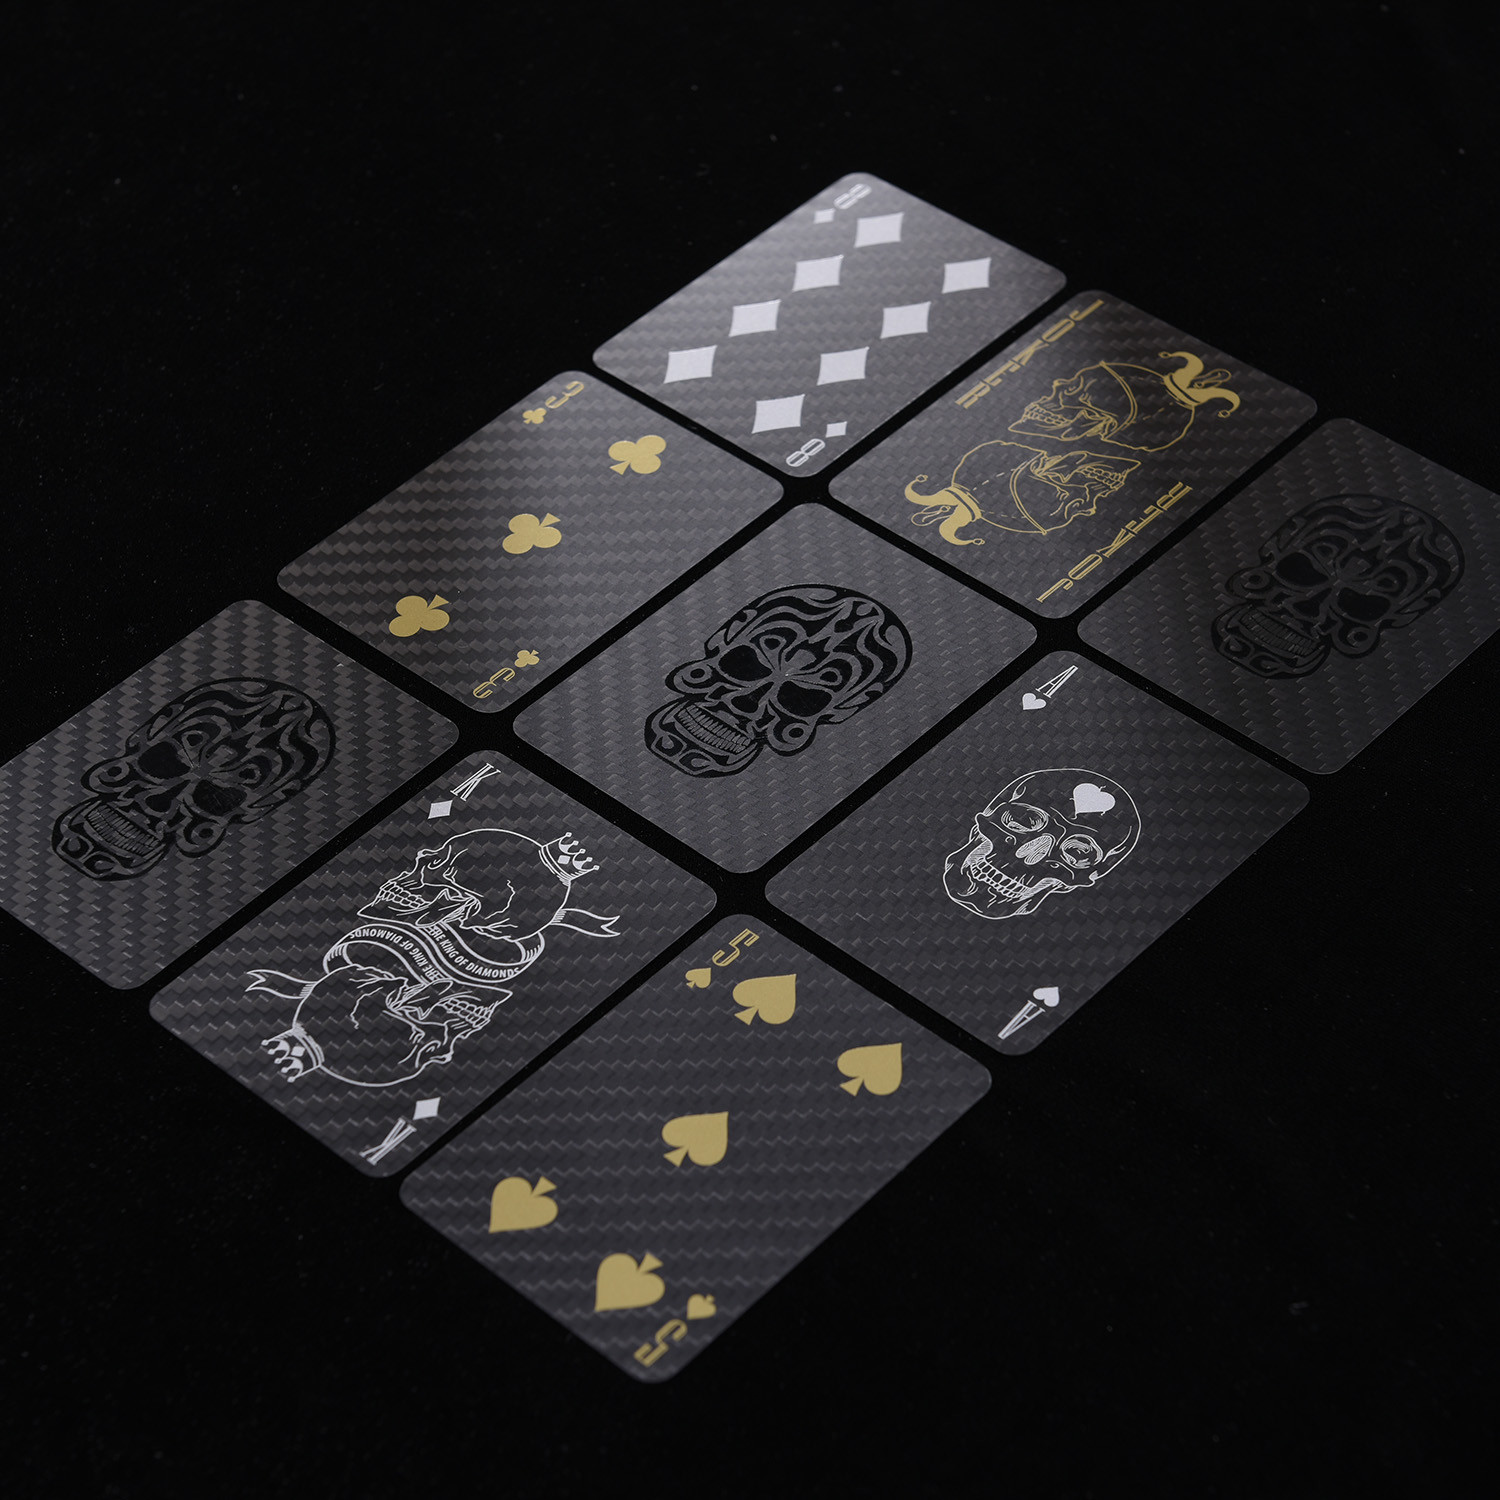 Premium Carbon Fiber Playing Poker Card // Grand Edition - POSH - Touch ...